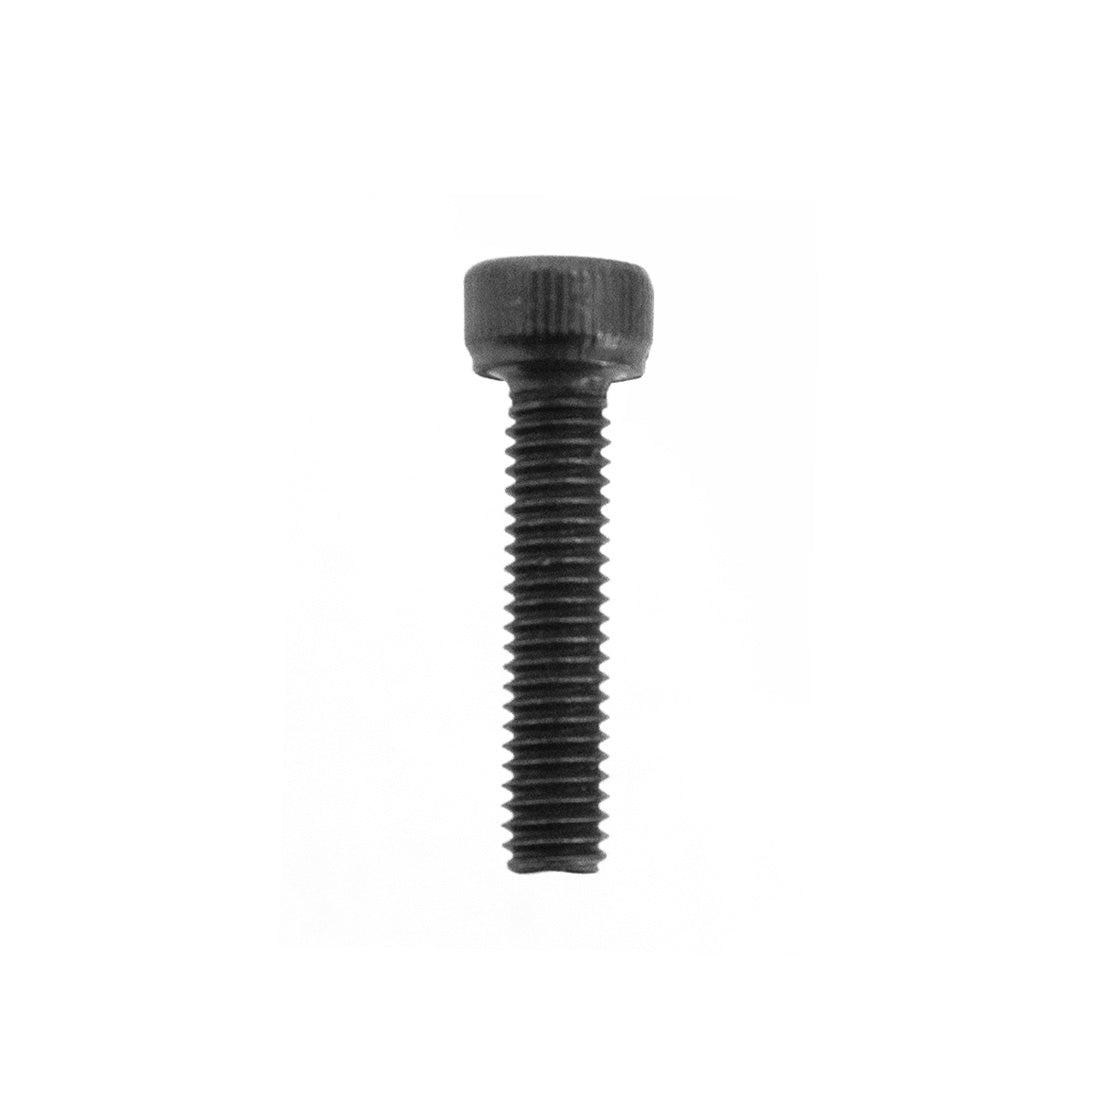 XERO Pole Replacement Clamp Bolt - Pack of 10 Full View